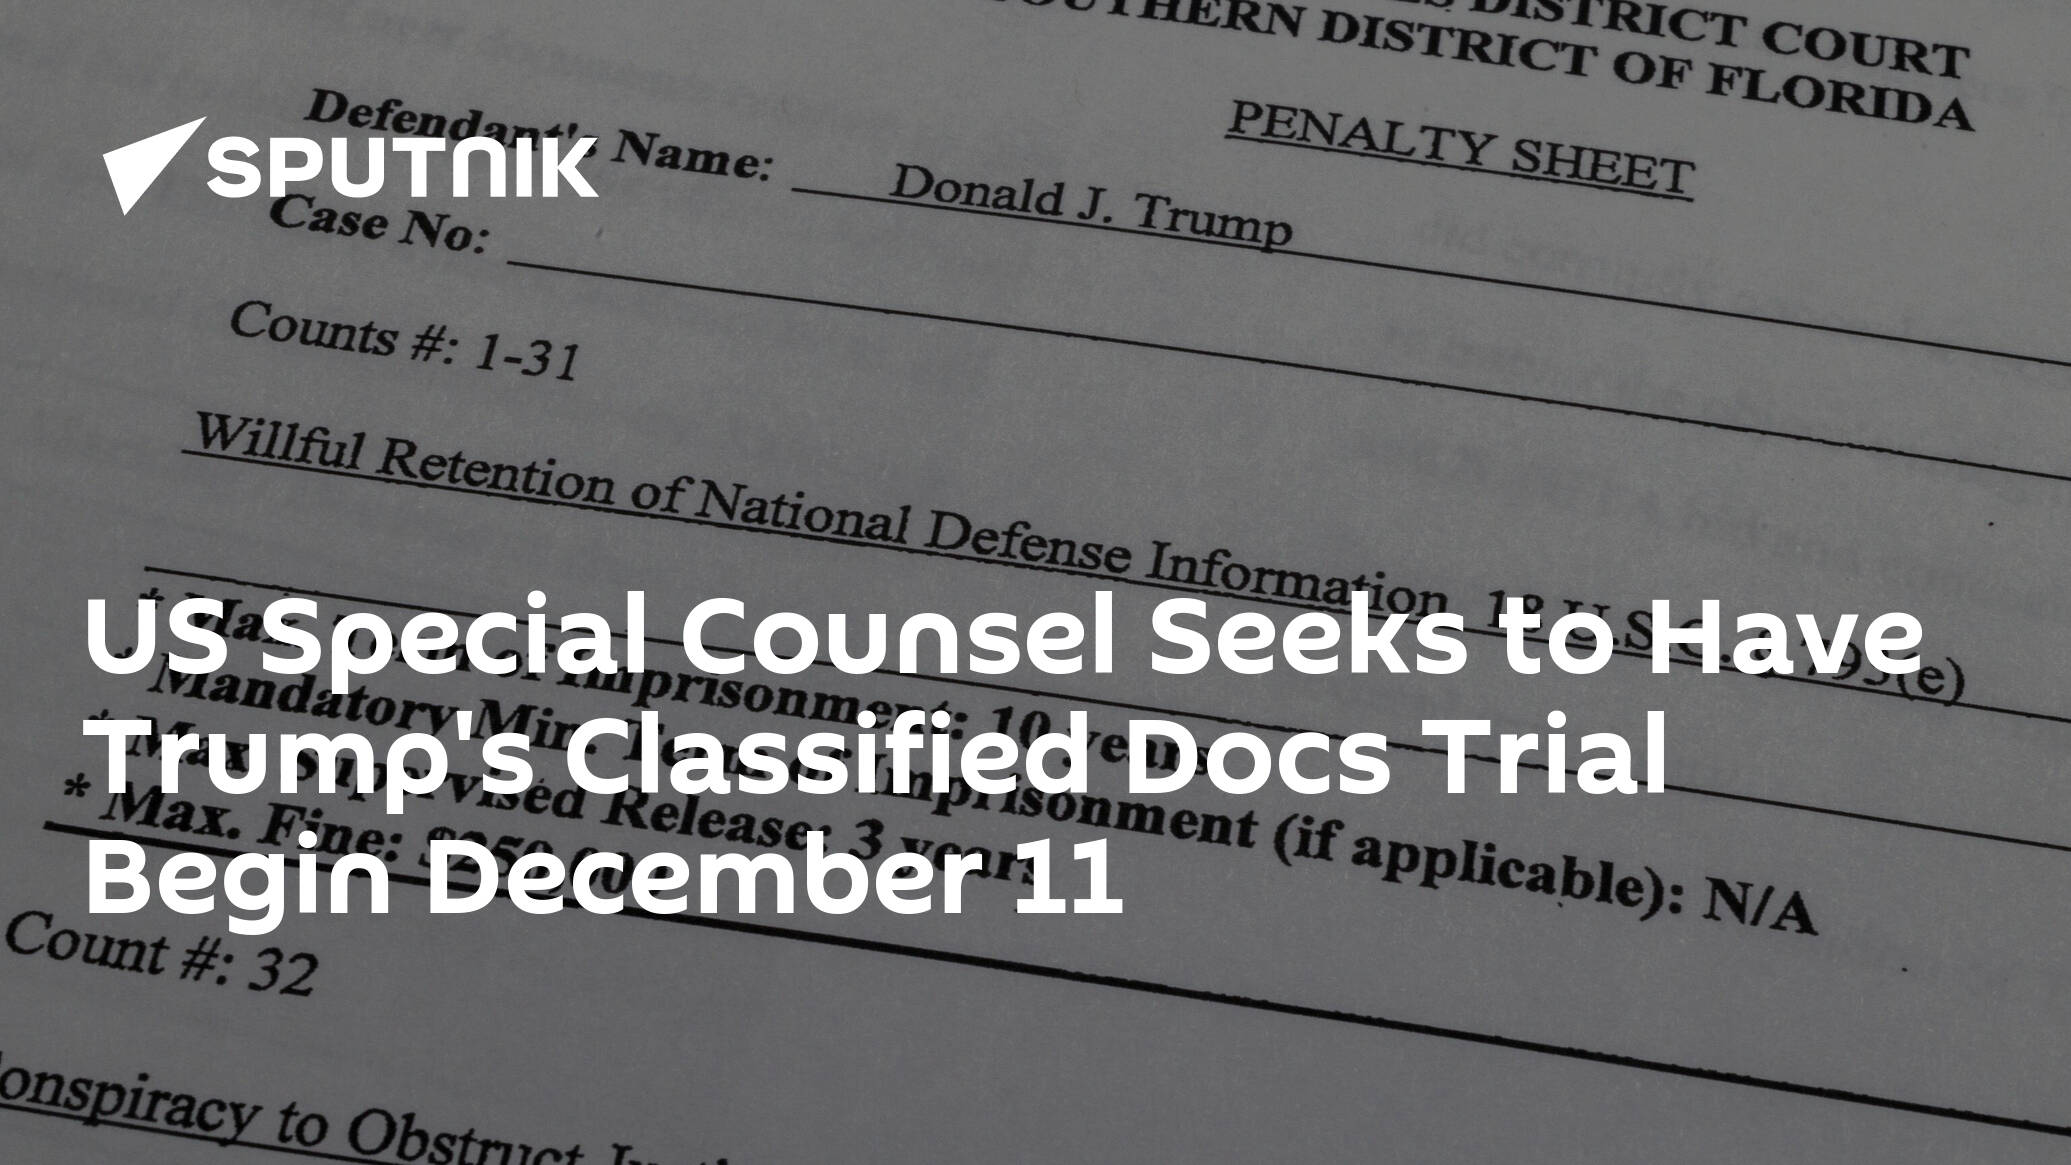 US Special Counsel Seeks to Have Trump's Classified Docs Trial Begin December 11